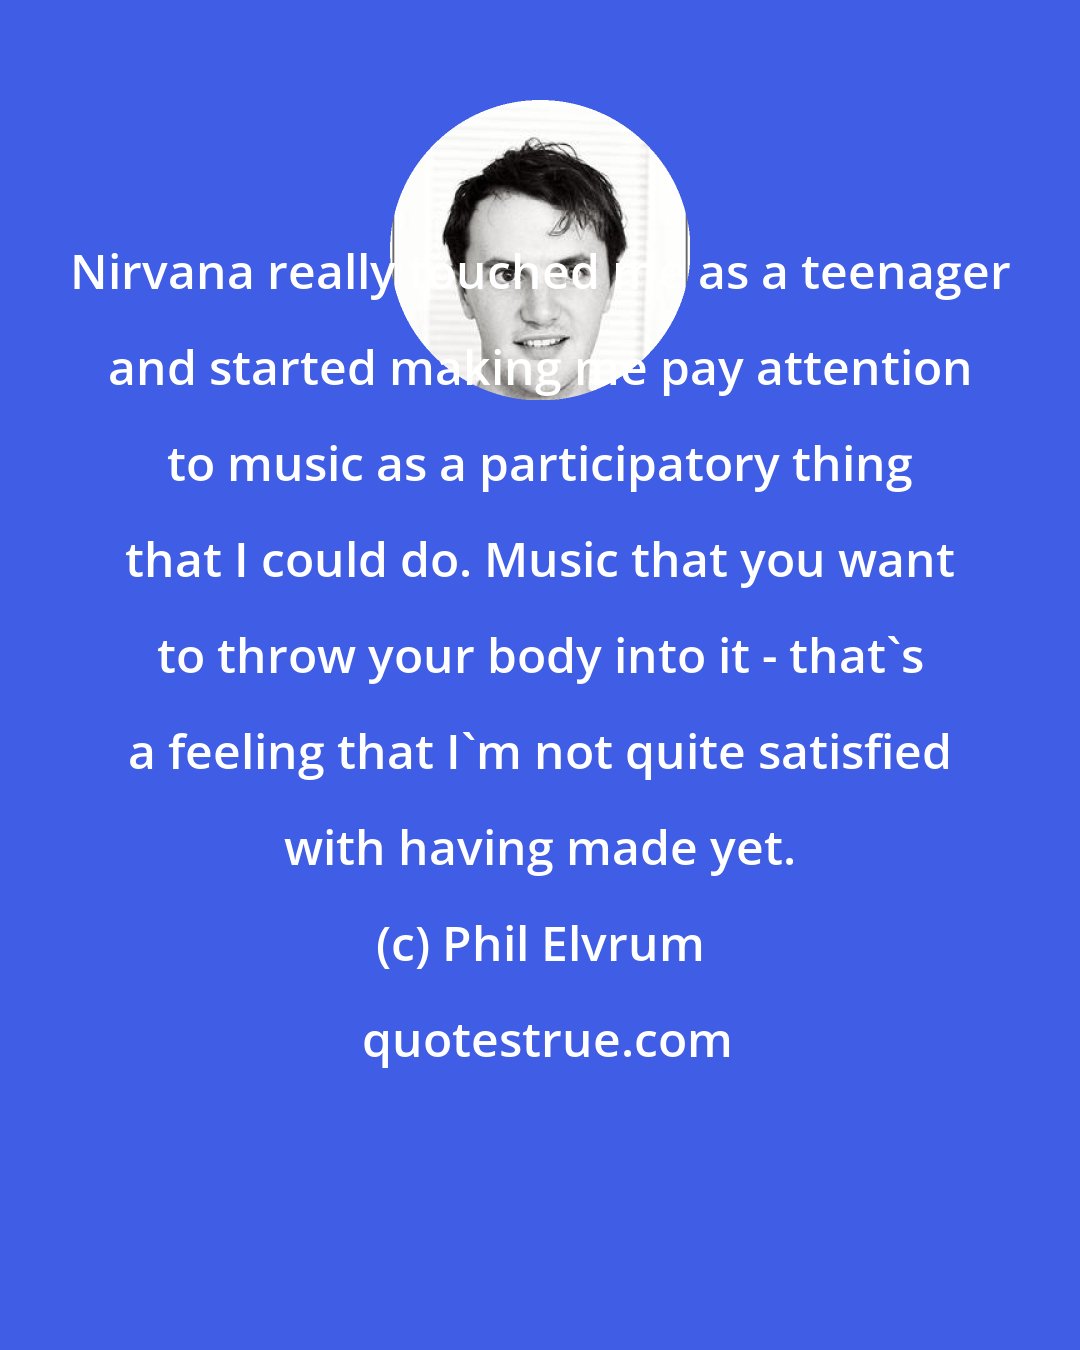 Phil Elvrum: Nirvana really touched me as a teenager and started making me pay attention to music as a participatory thing that I could do. Music that you want to throw your body into it - that's a feeling that I'm not quite satisfied with having made yet.